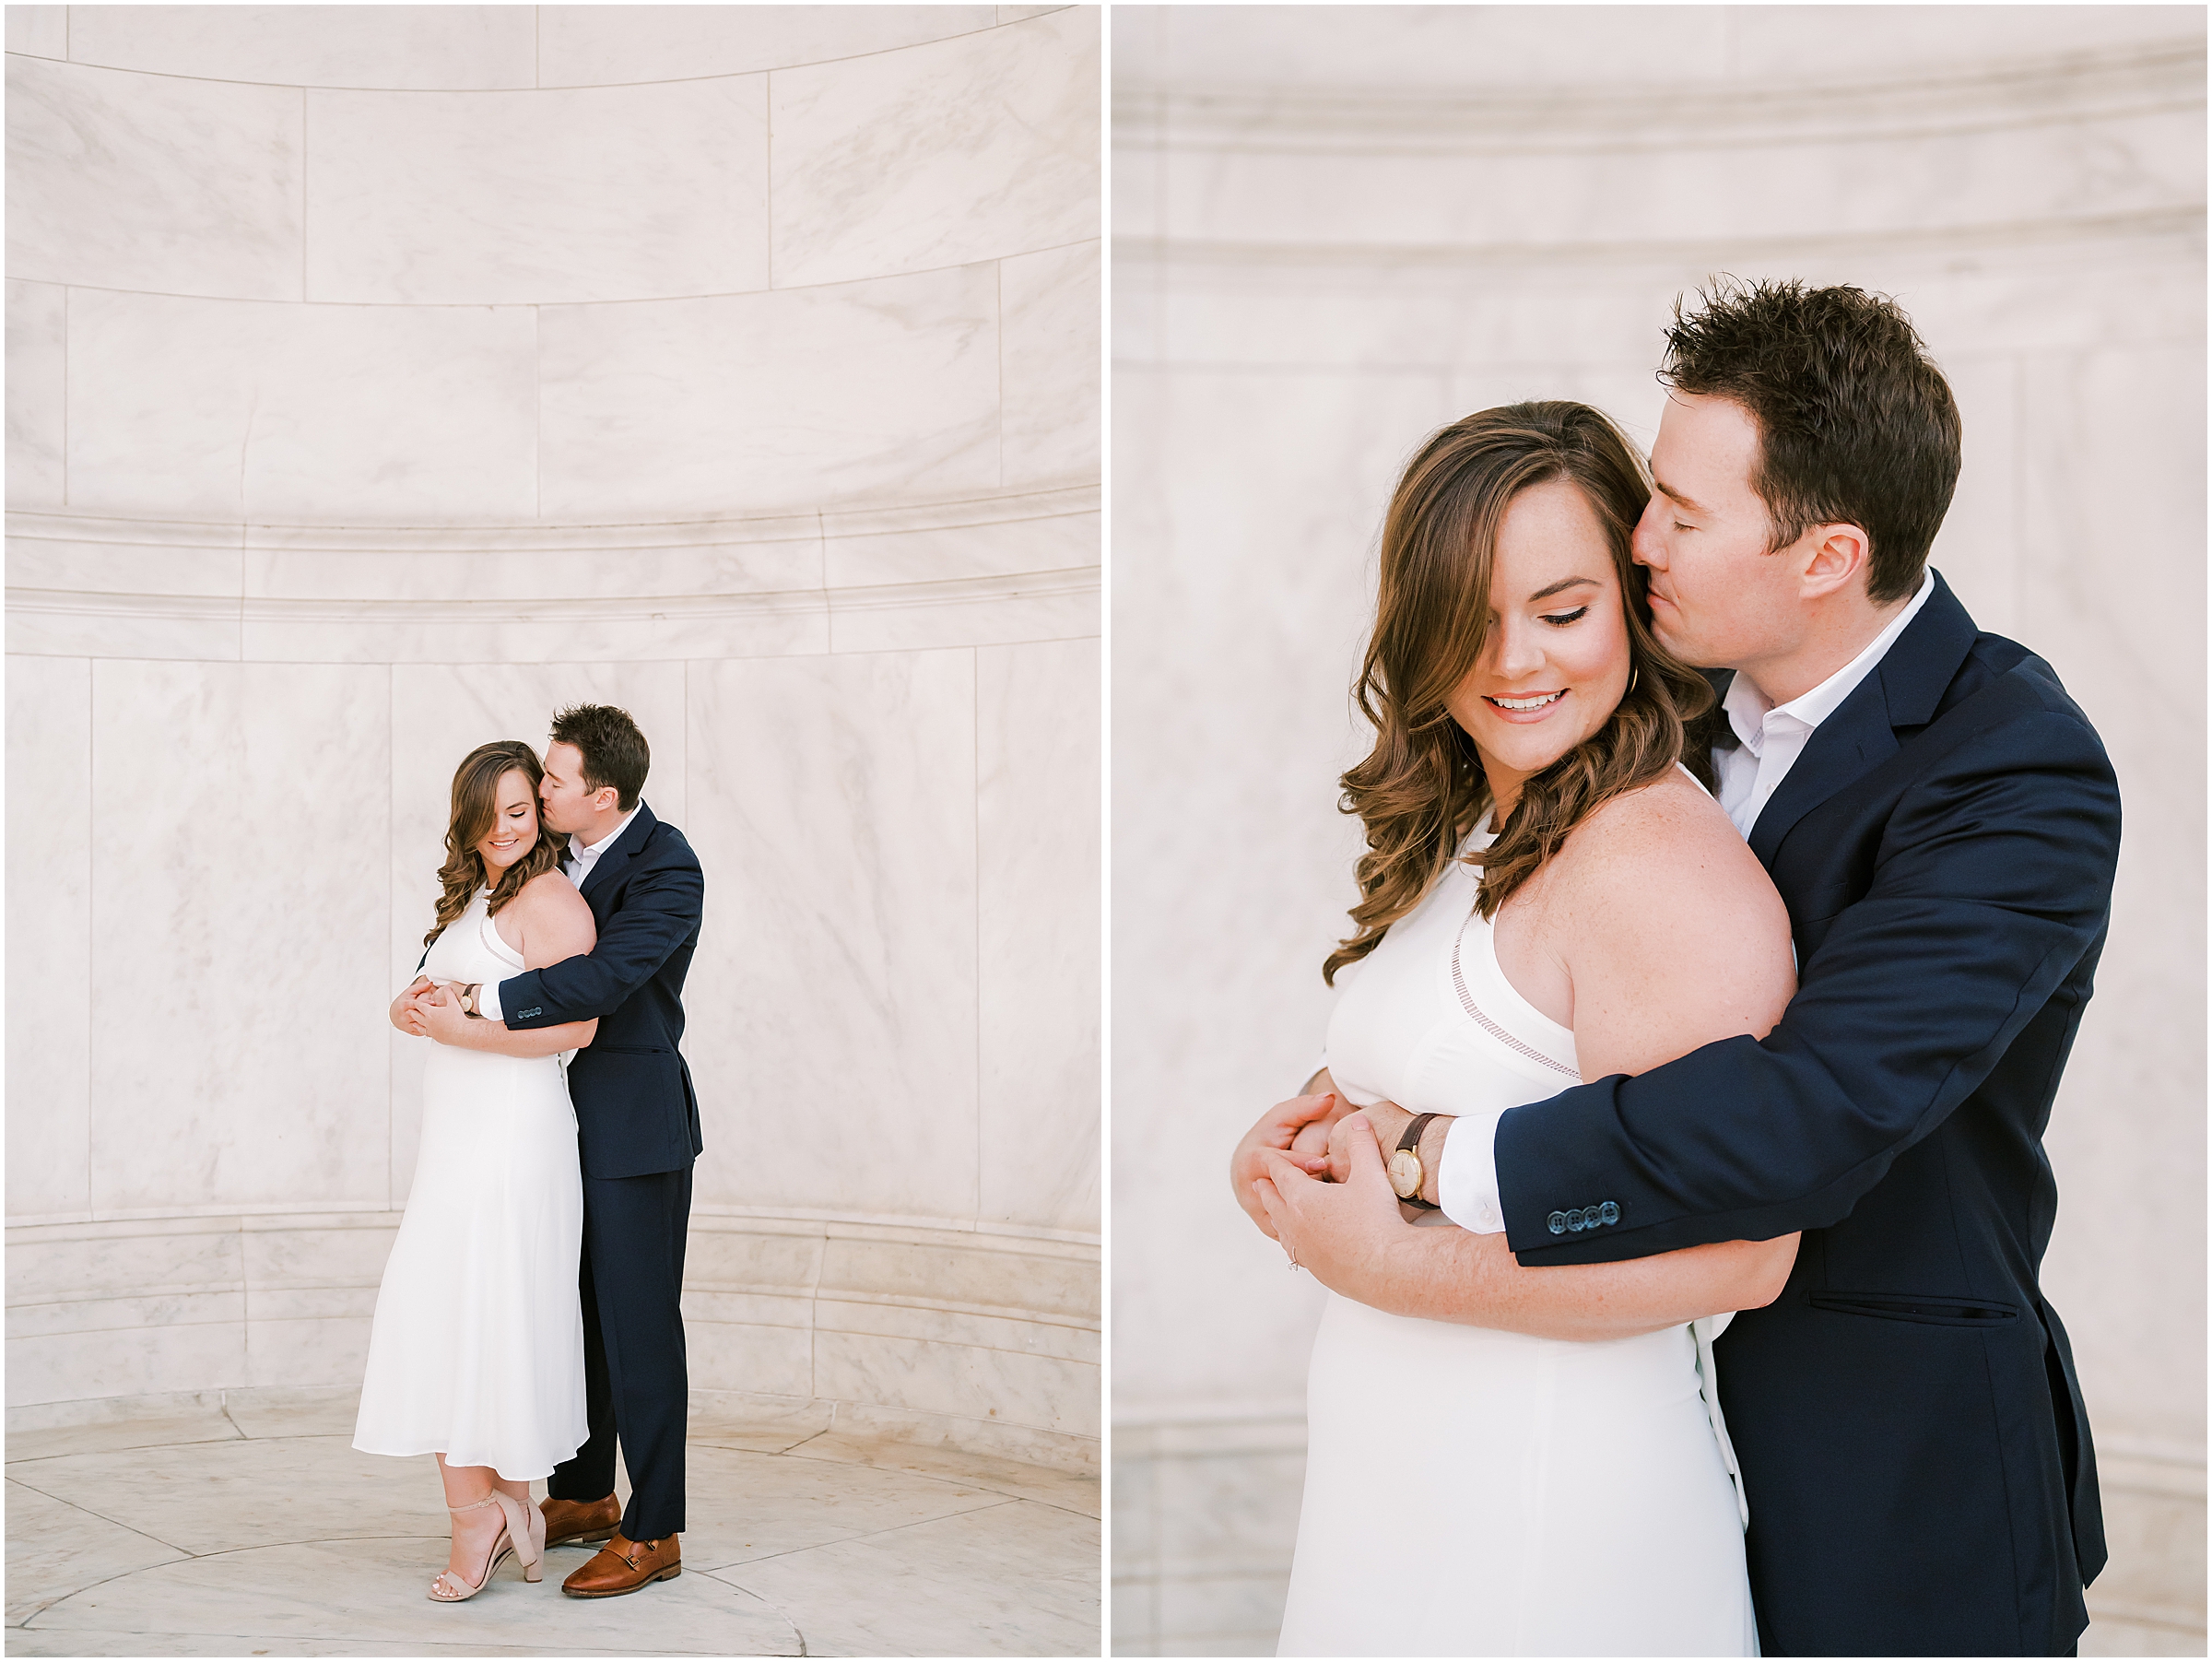 Couple embracing during engagement session at the Lincoln Memorial